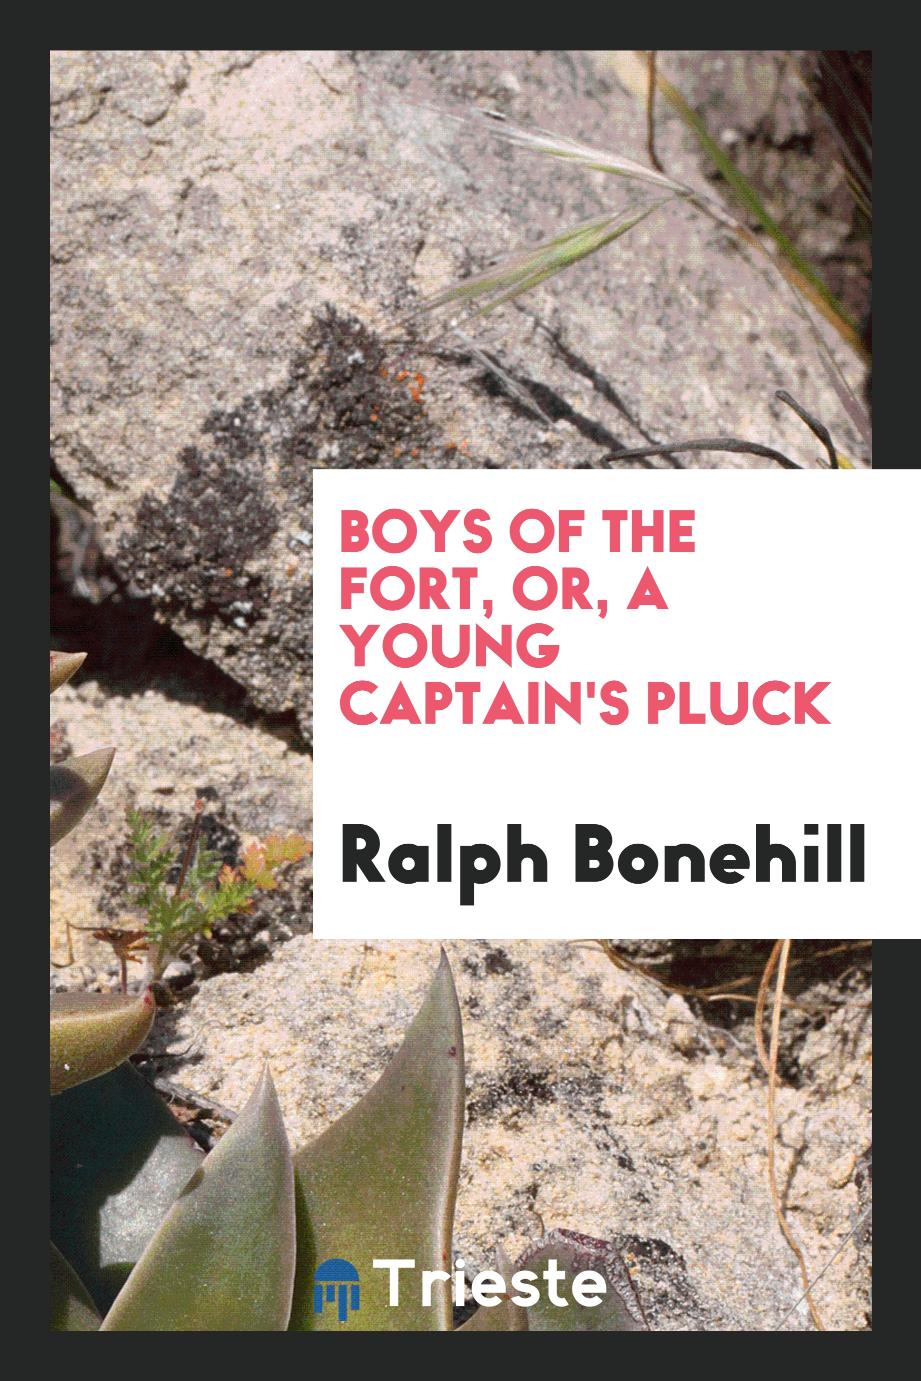 Boys of the Fort, or, a Young Captain's Pluck